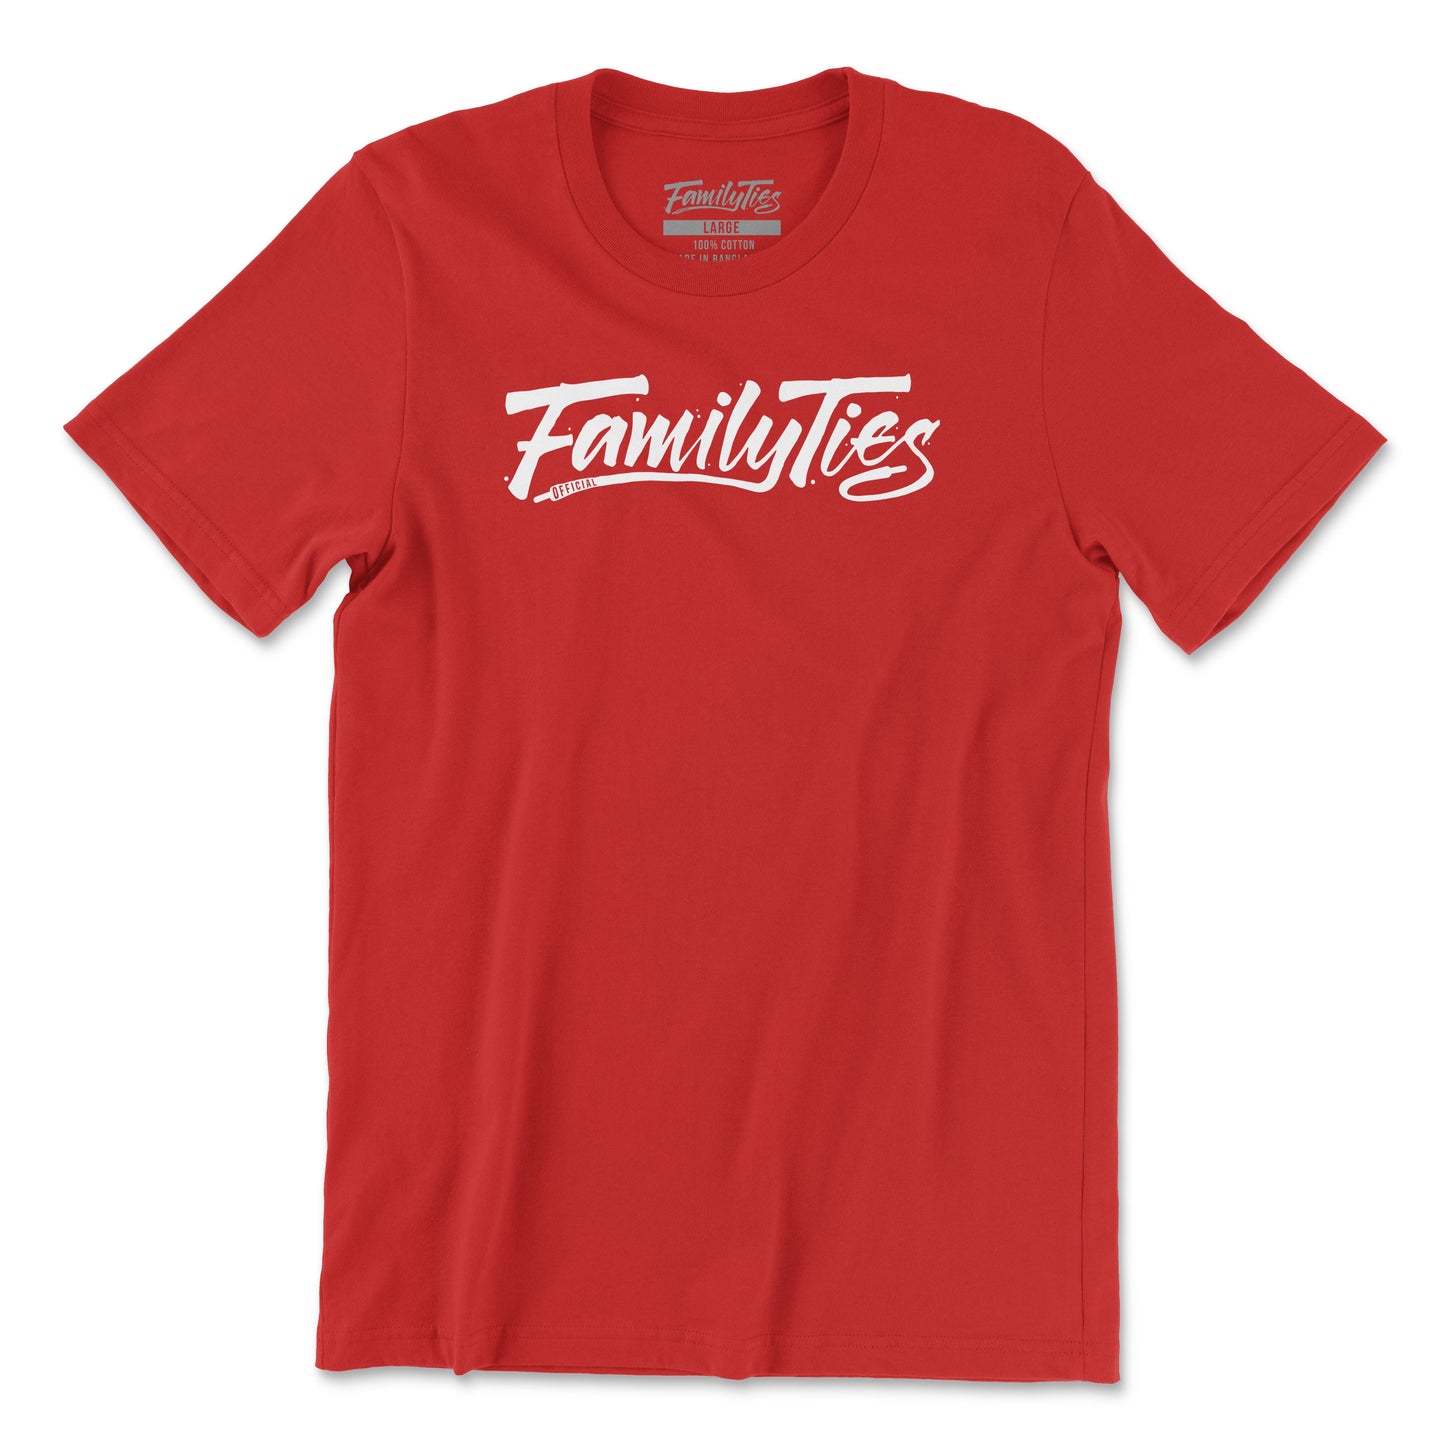 Family Ties Official Red Tee